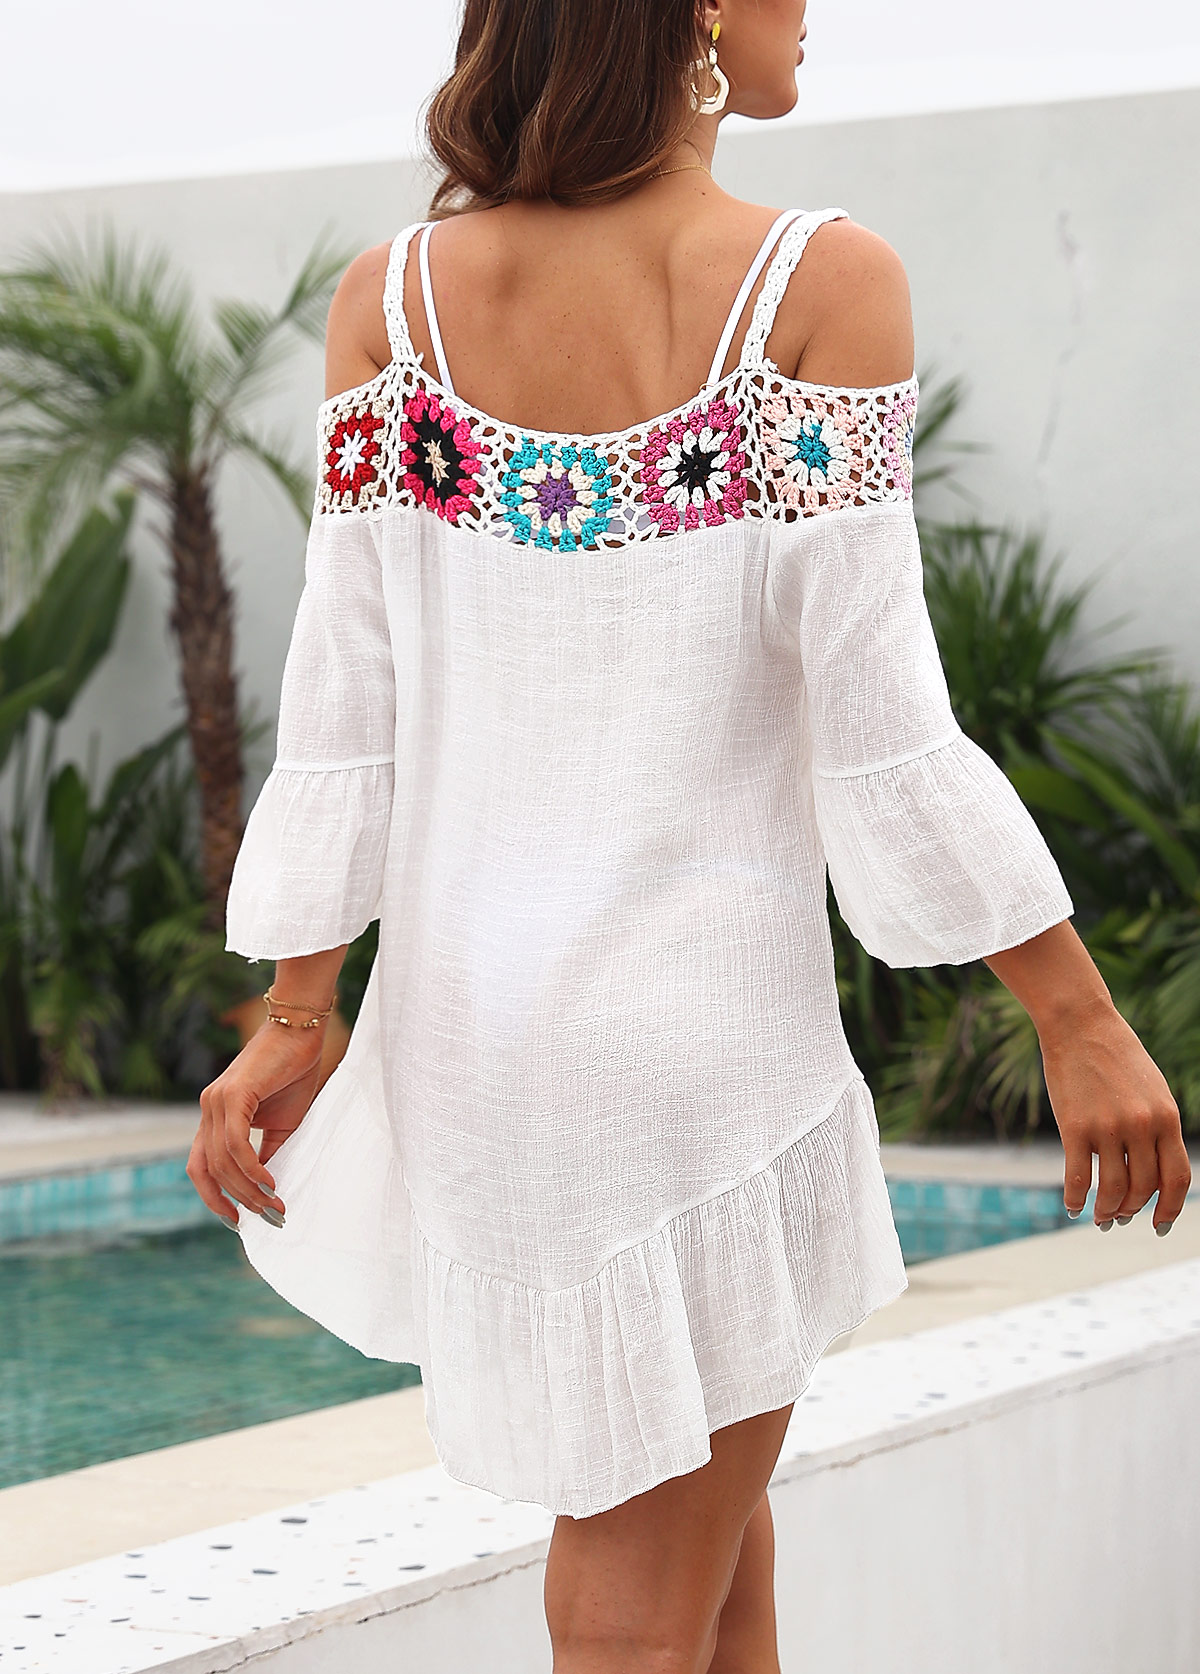 Patchwork Geometric Print White Cover Up